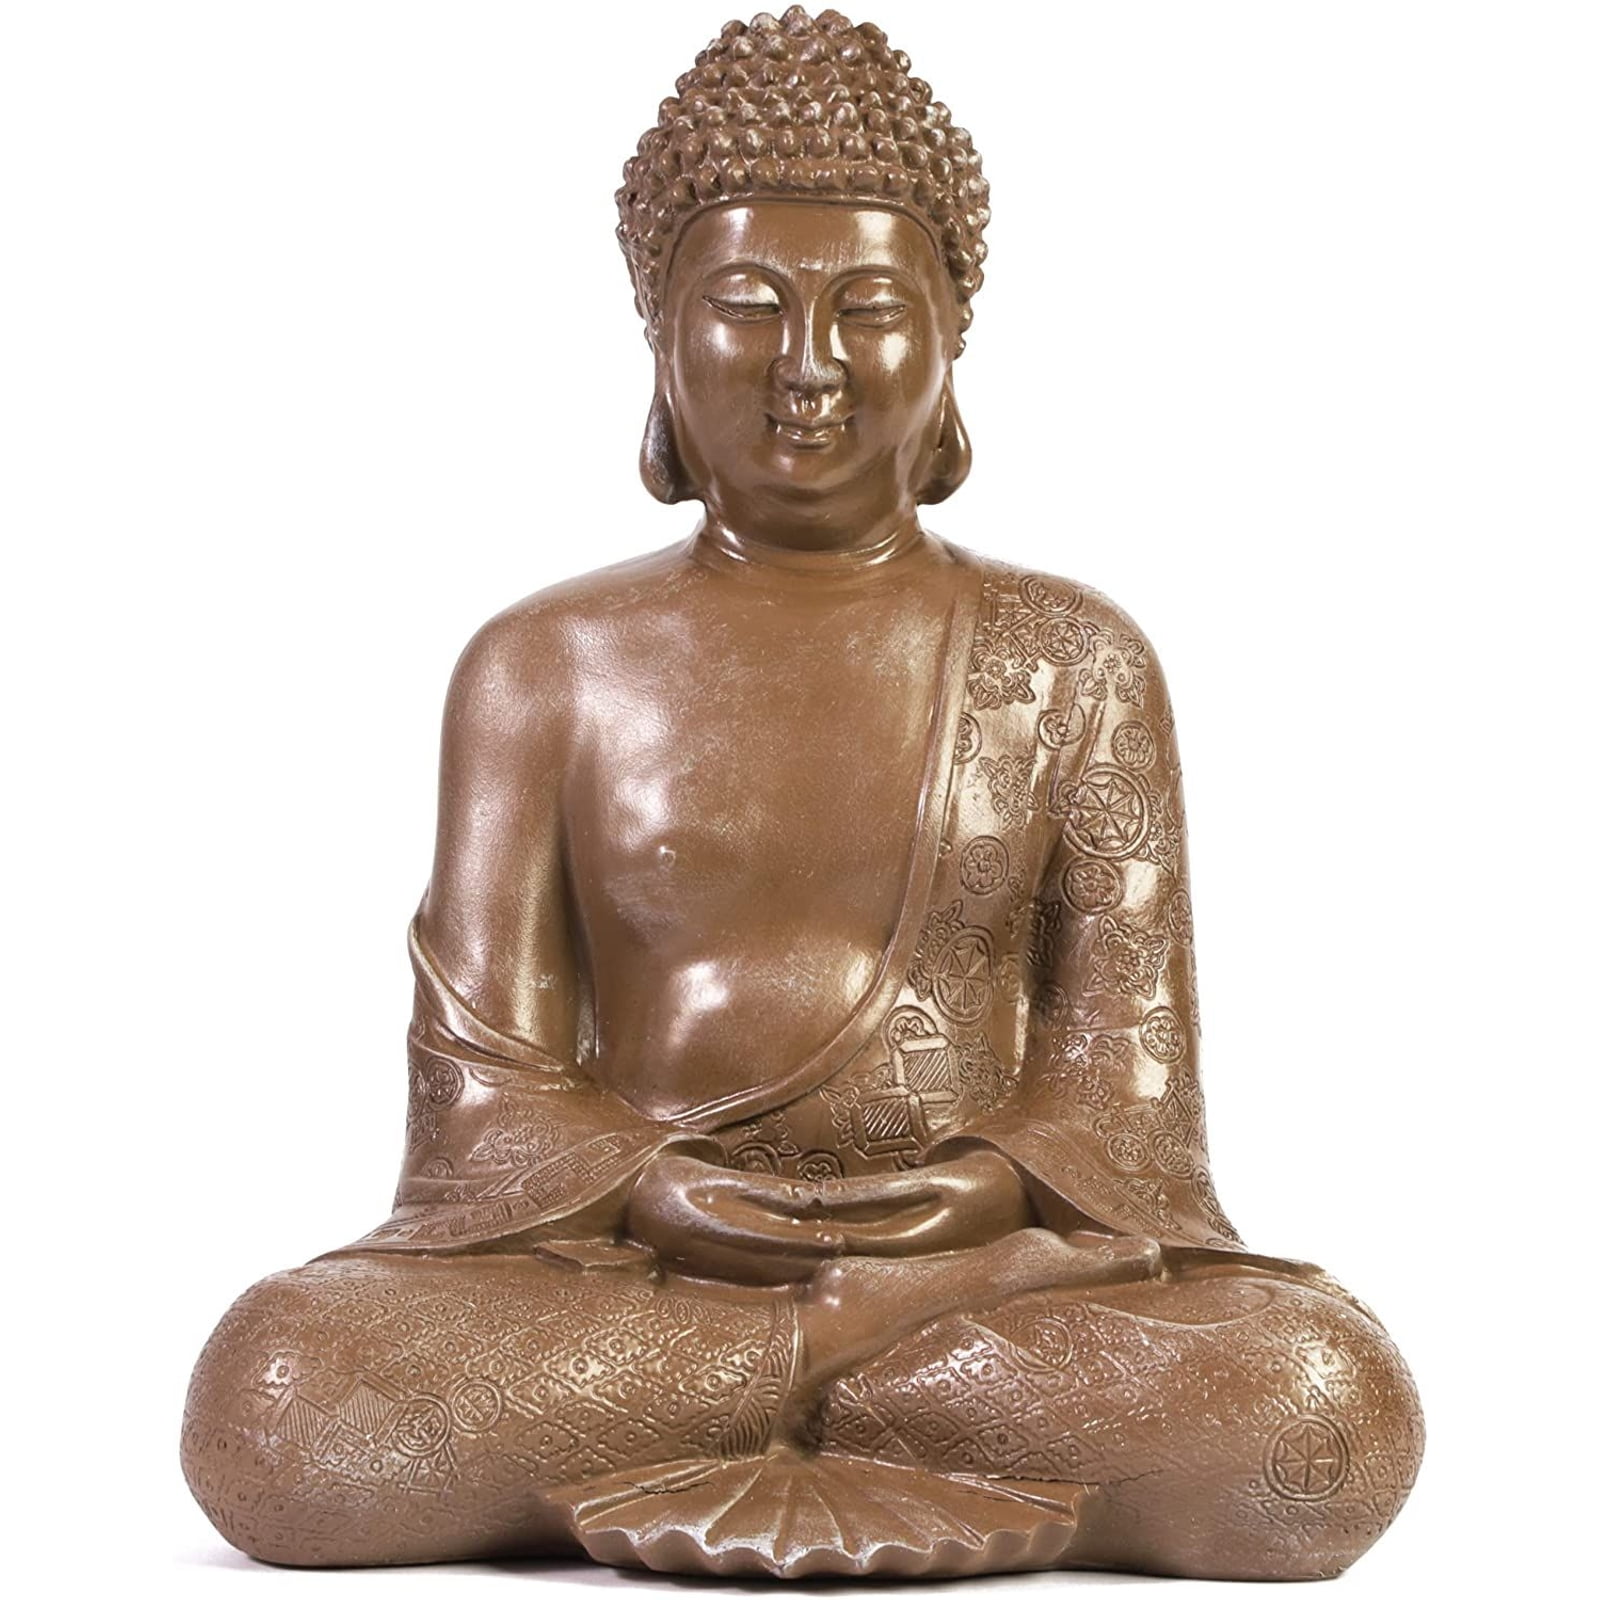 6 Tall Meditating Buddha Bust Head Statue in Elegant Black with Brushed Bronze Finish Premium statue made of Marble Stone